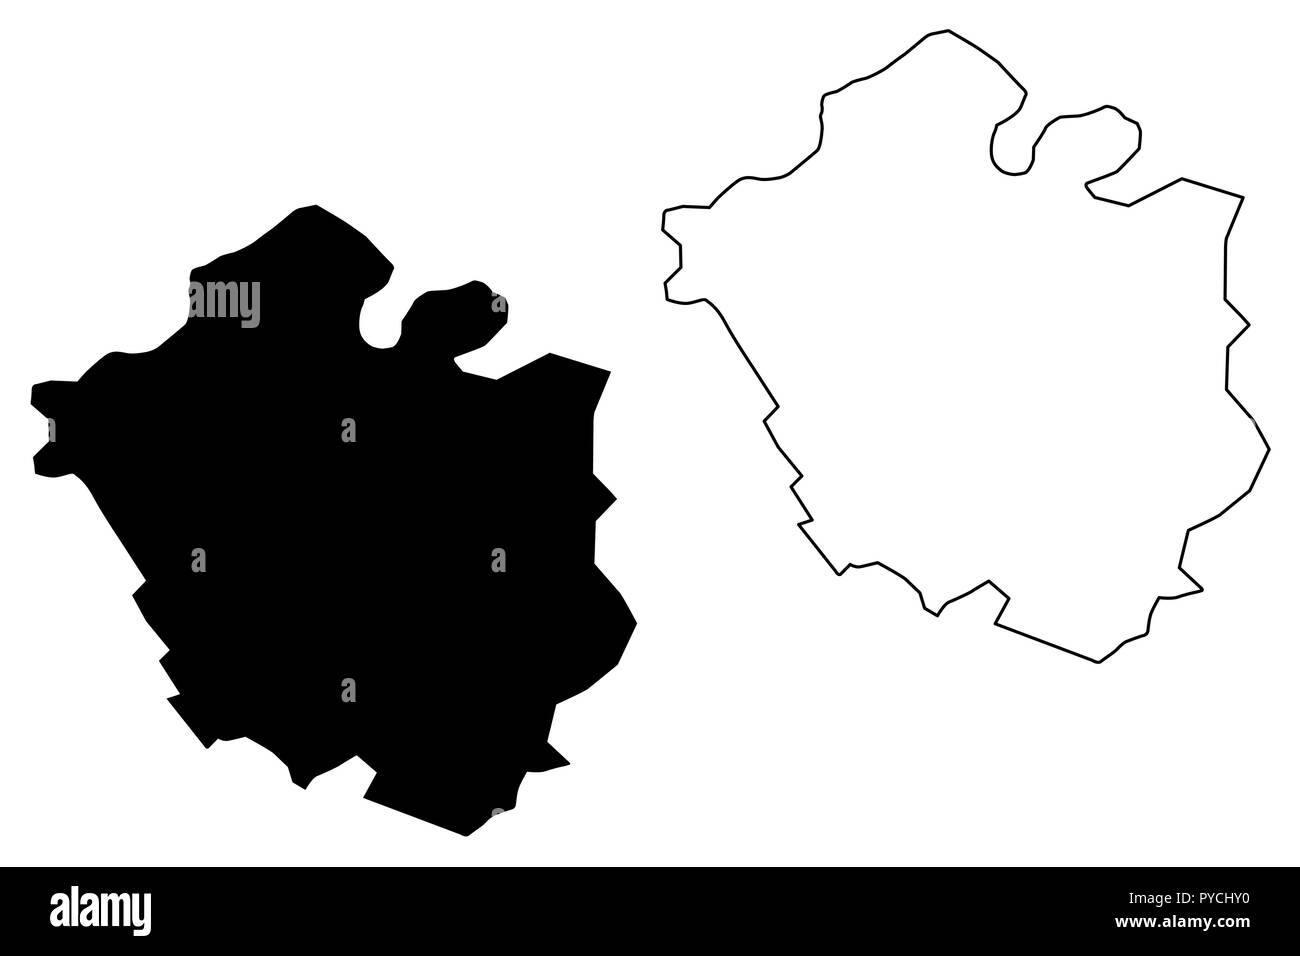 Chandigarh (States and union territories of India, Federated states, Republic of India) map vector illustration, scribble sketch Chandigarh - City and Stock Vector